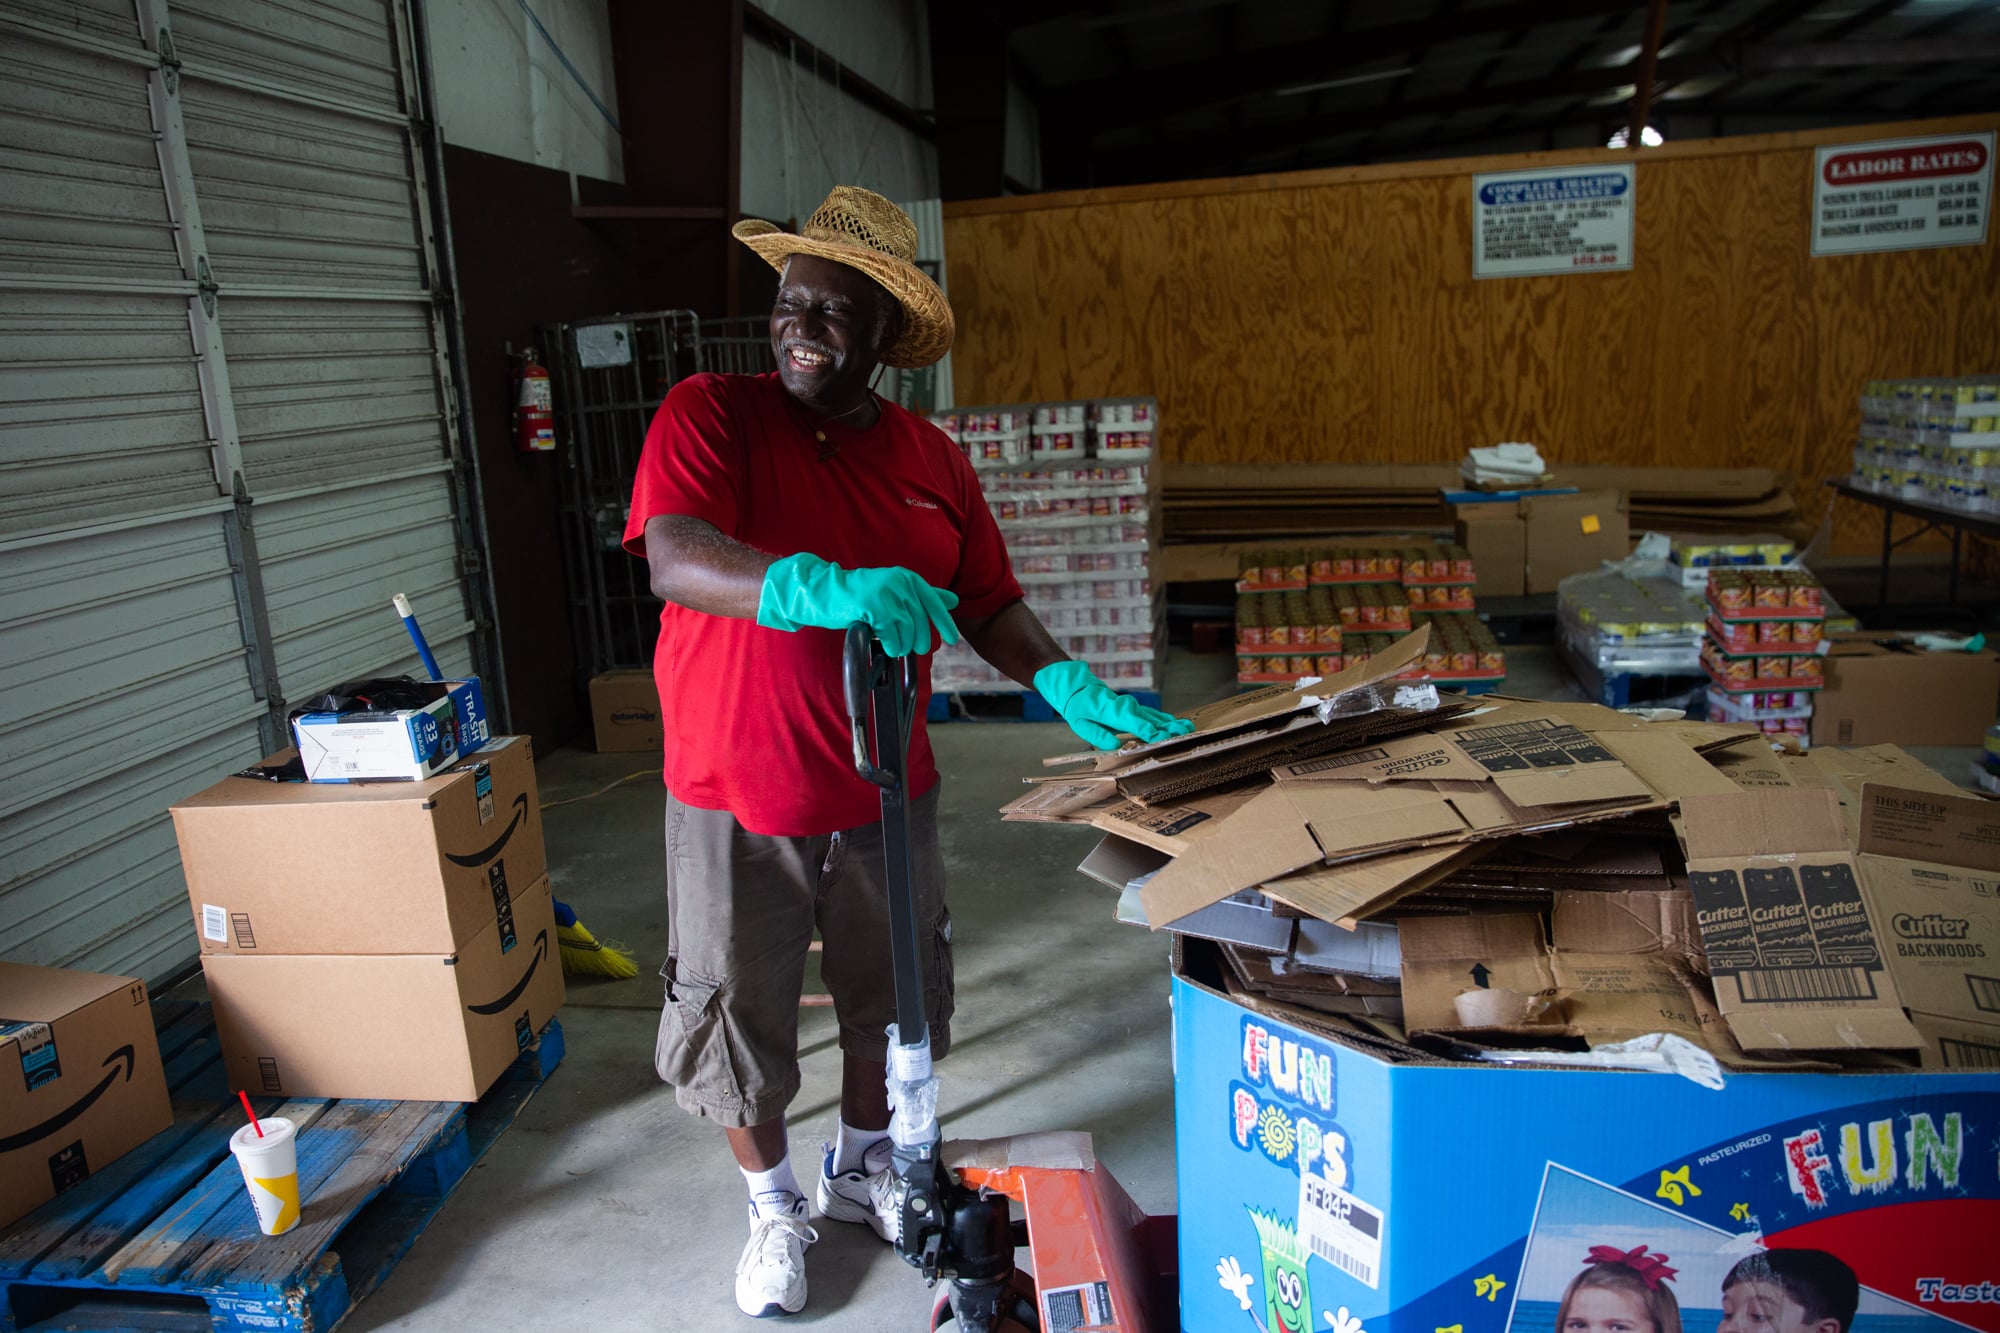 Jerry Rivers, 63, breaks down boxes in the warehouse for the Dillon County Long Term Recovery Group in Dillon, South Carolina. It’s one of several grassroots groups developed to help communities recover from disasters when government programs aren't available or can’t meet the need. (Harrison Mantas/News21)